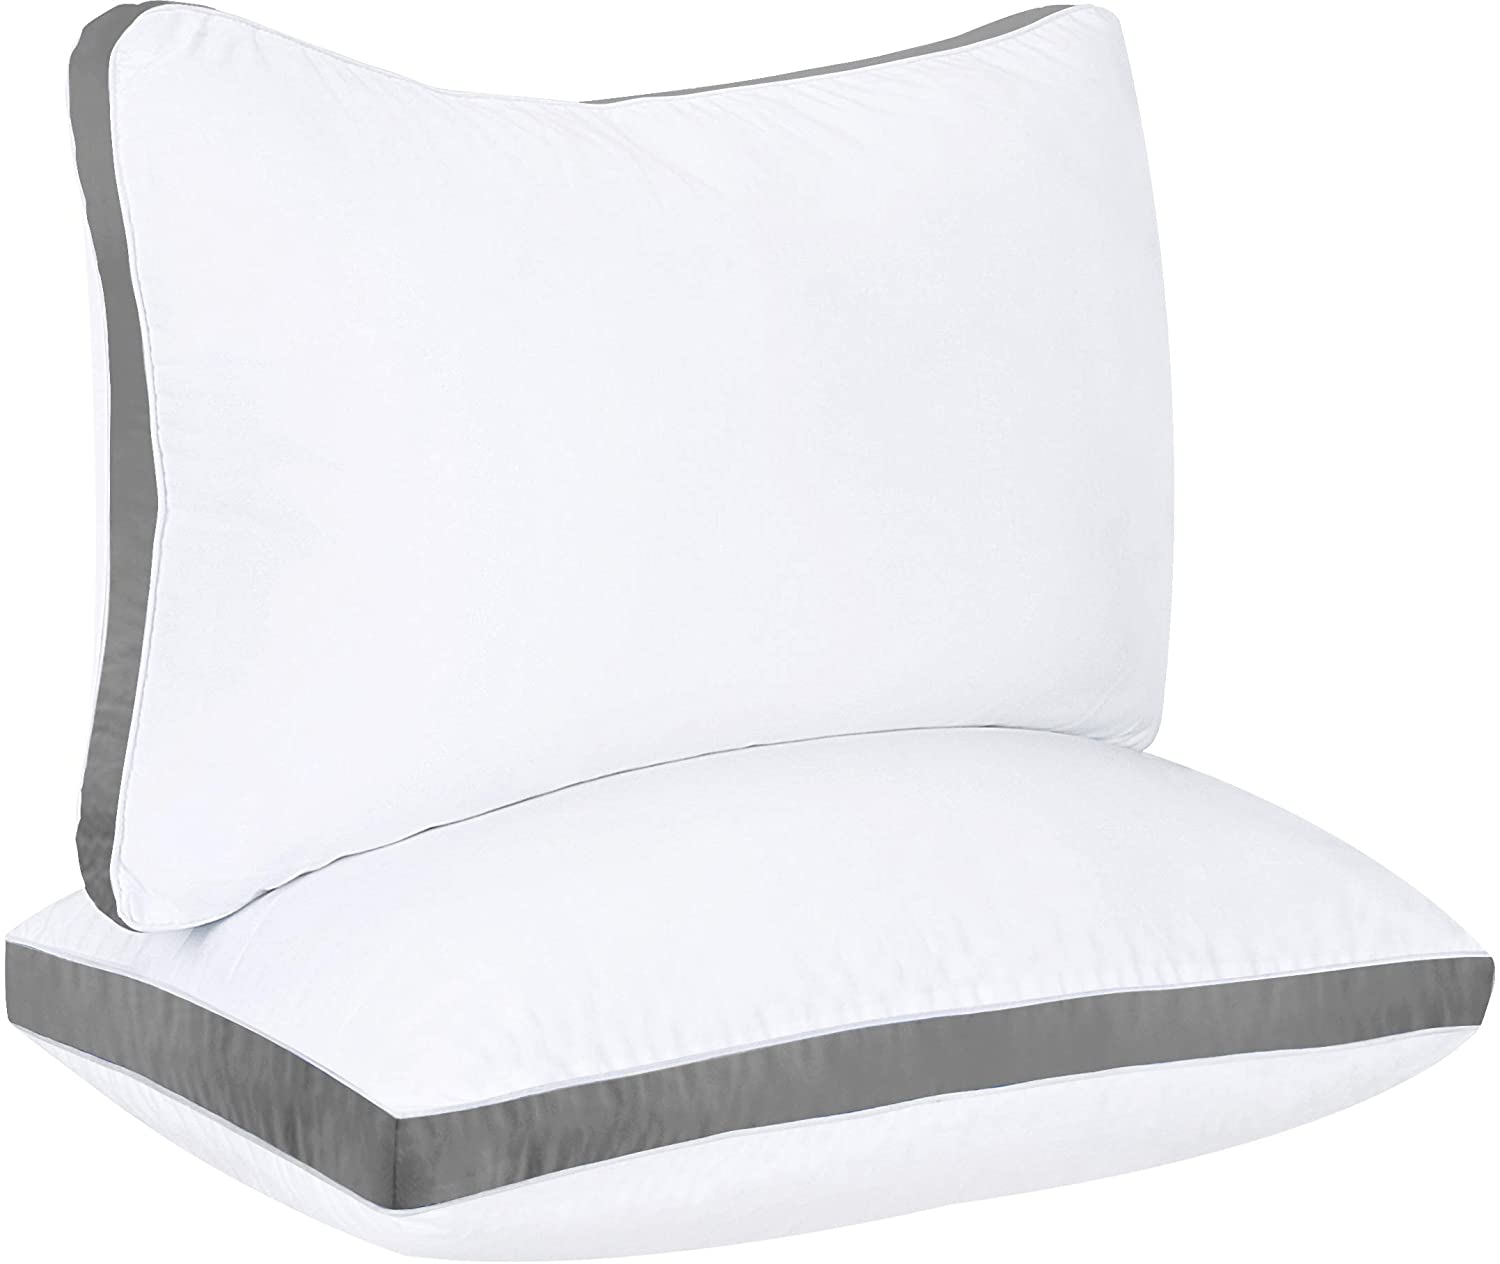 Utopia Bedding Gusseted King Size Pillows, Set Of 2